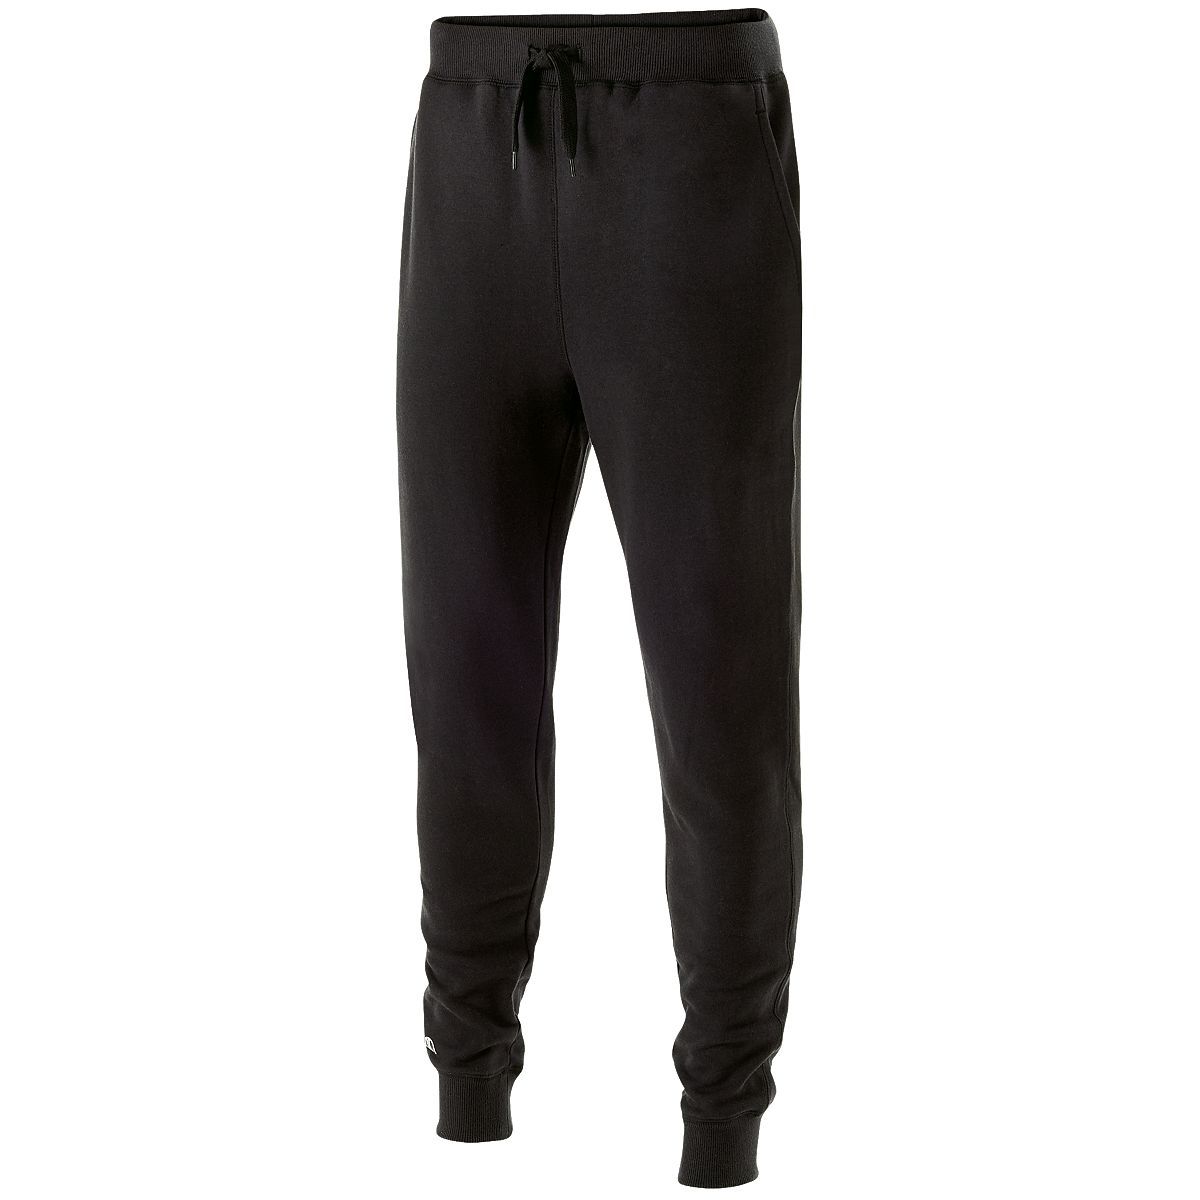 Holloway 60/40 Fleece Jogger in Black  -Part of the Adult, Holloway product lines at KanaleyCreations.com